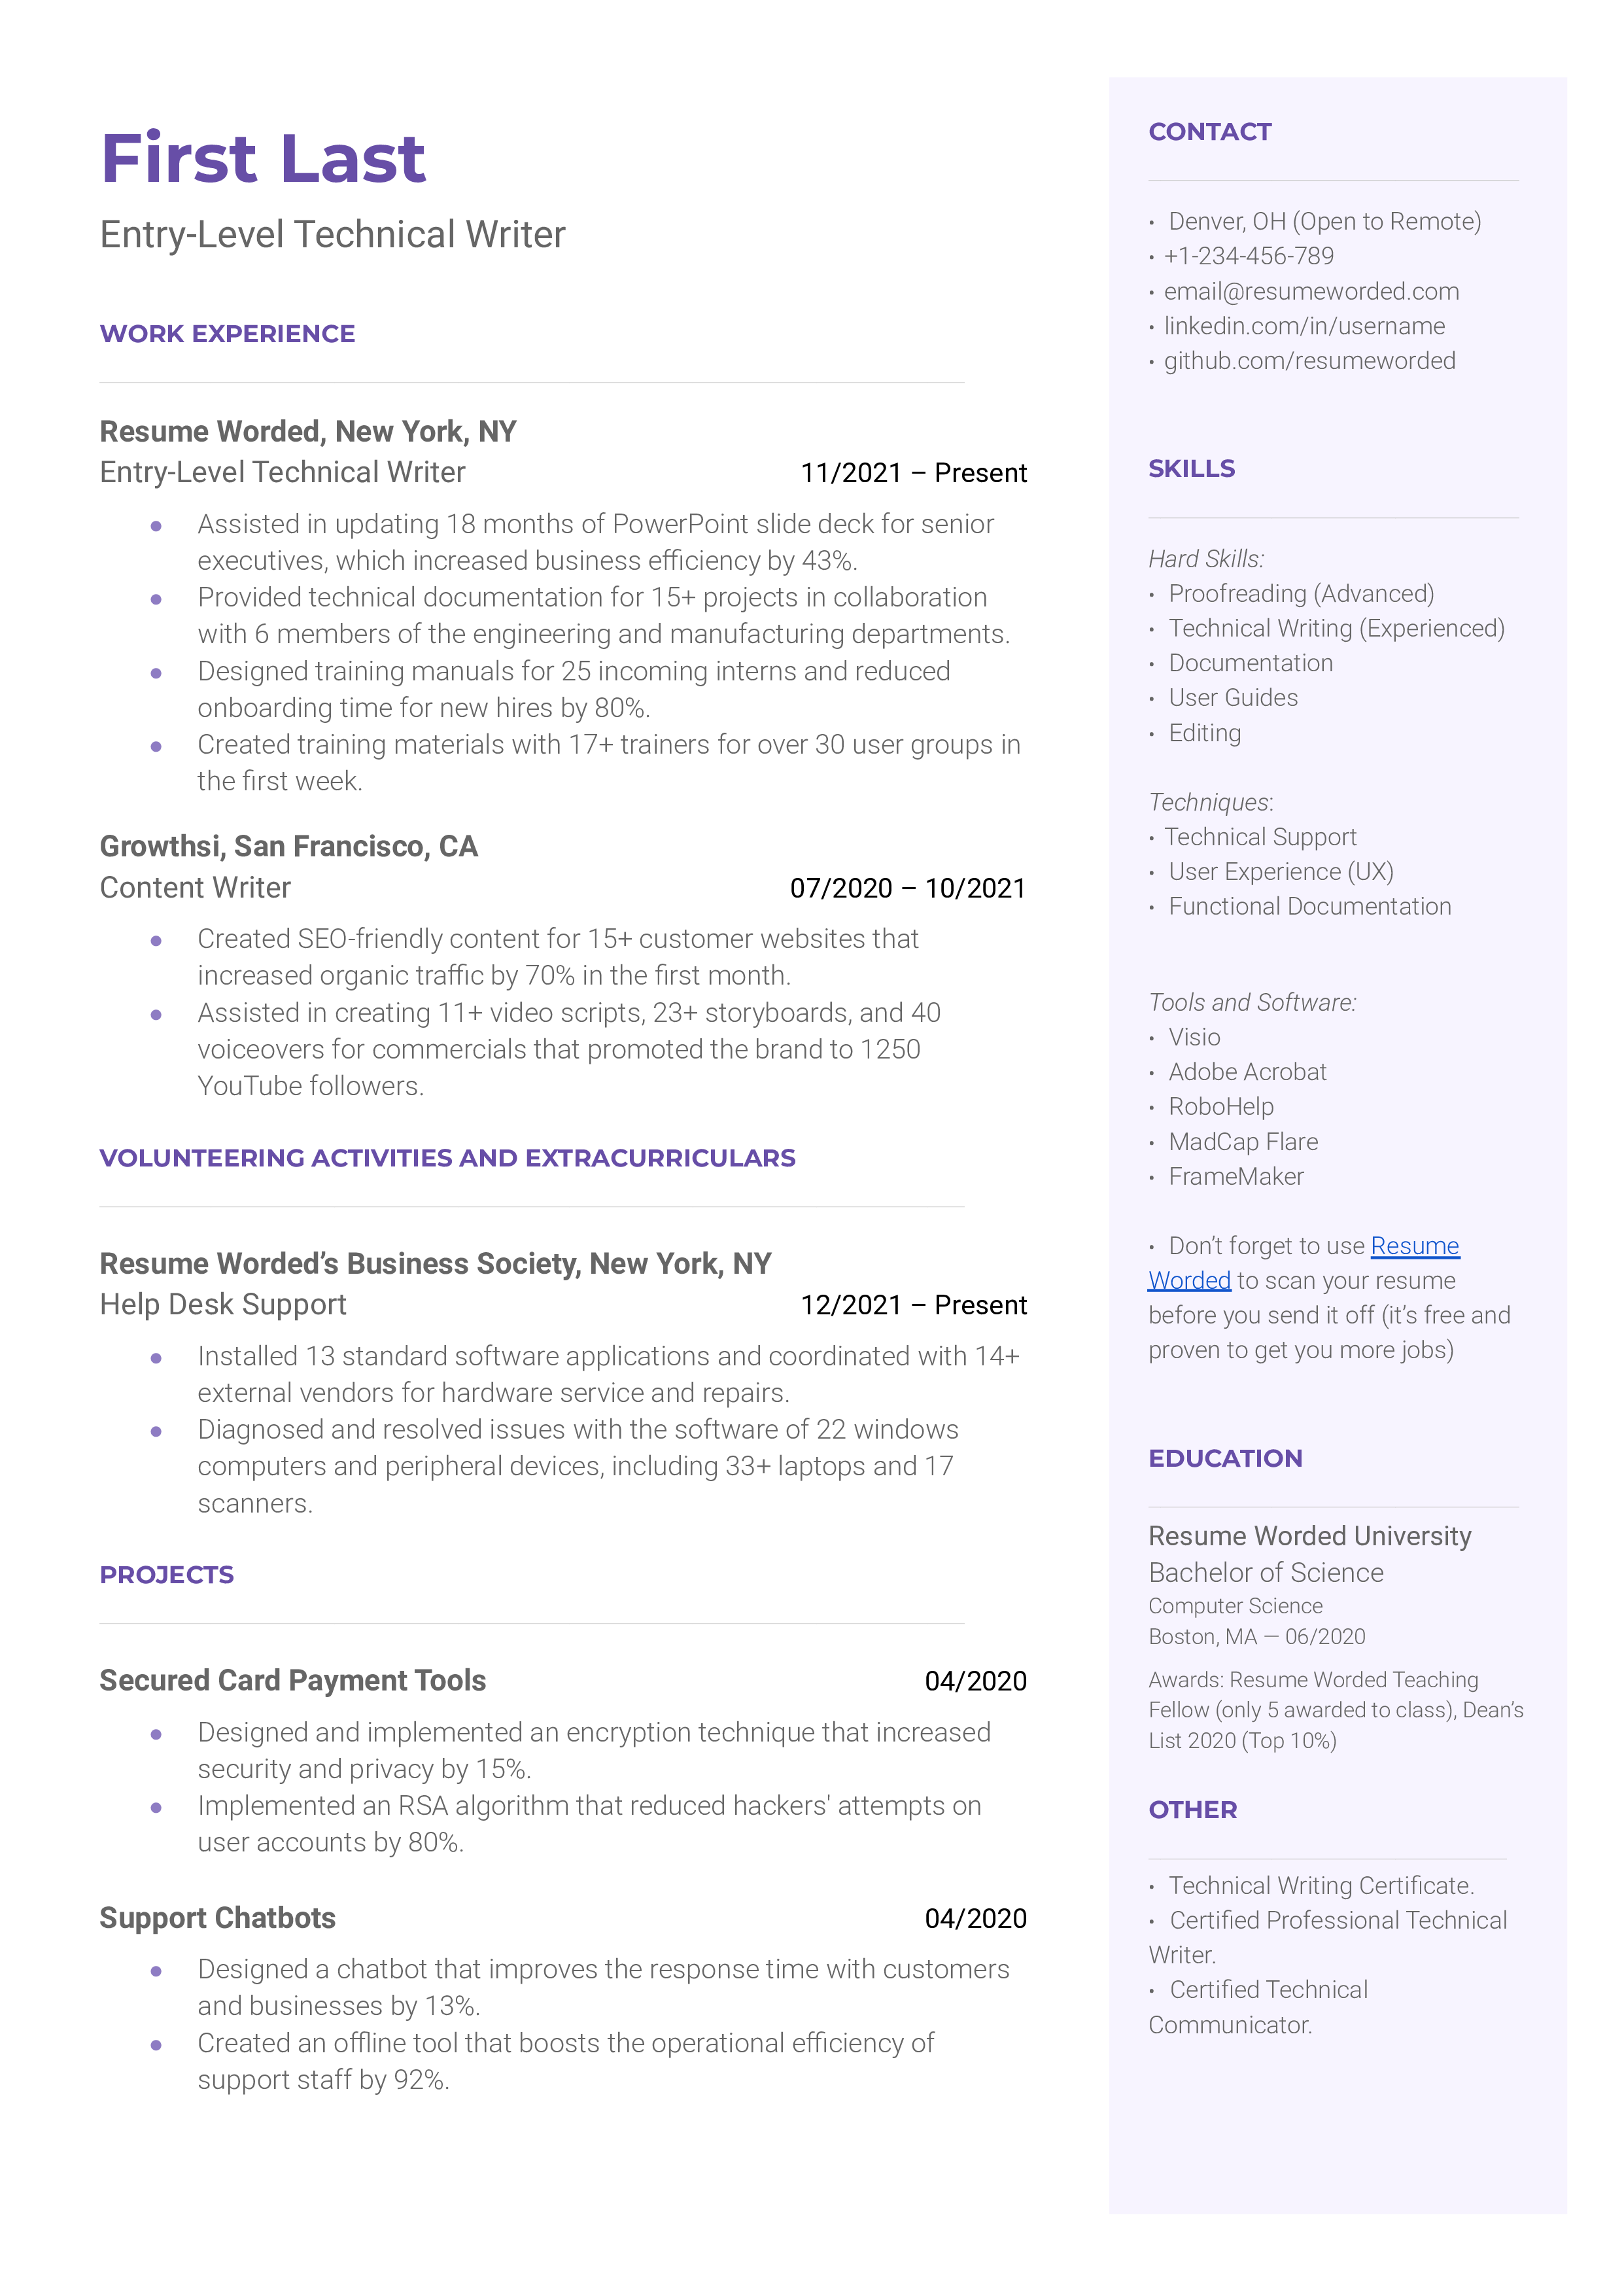 An example CV for Entry-Level Technical Writer role.